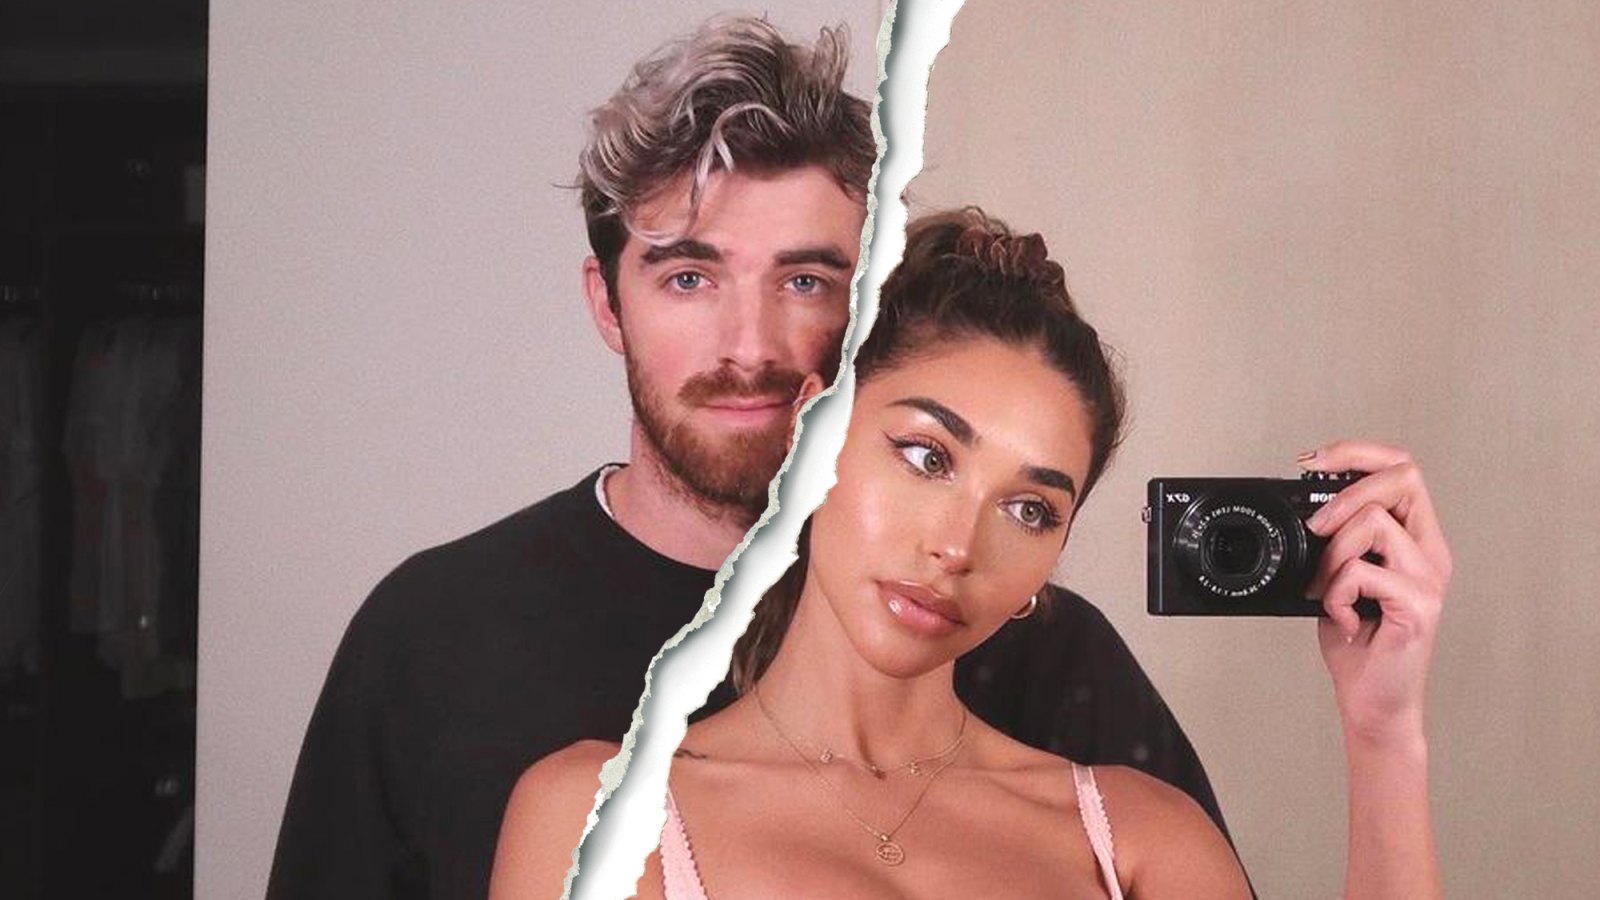 Chantel Jeffries and The Chainsmokers’ Drew Taggart Split After Less Than 1 Year of Dating